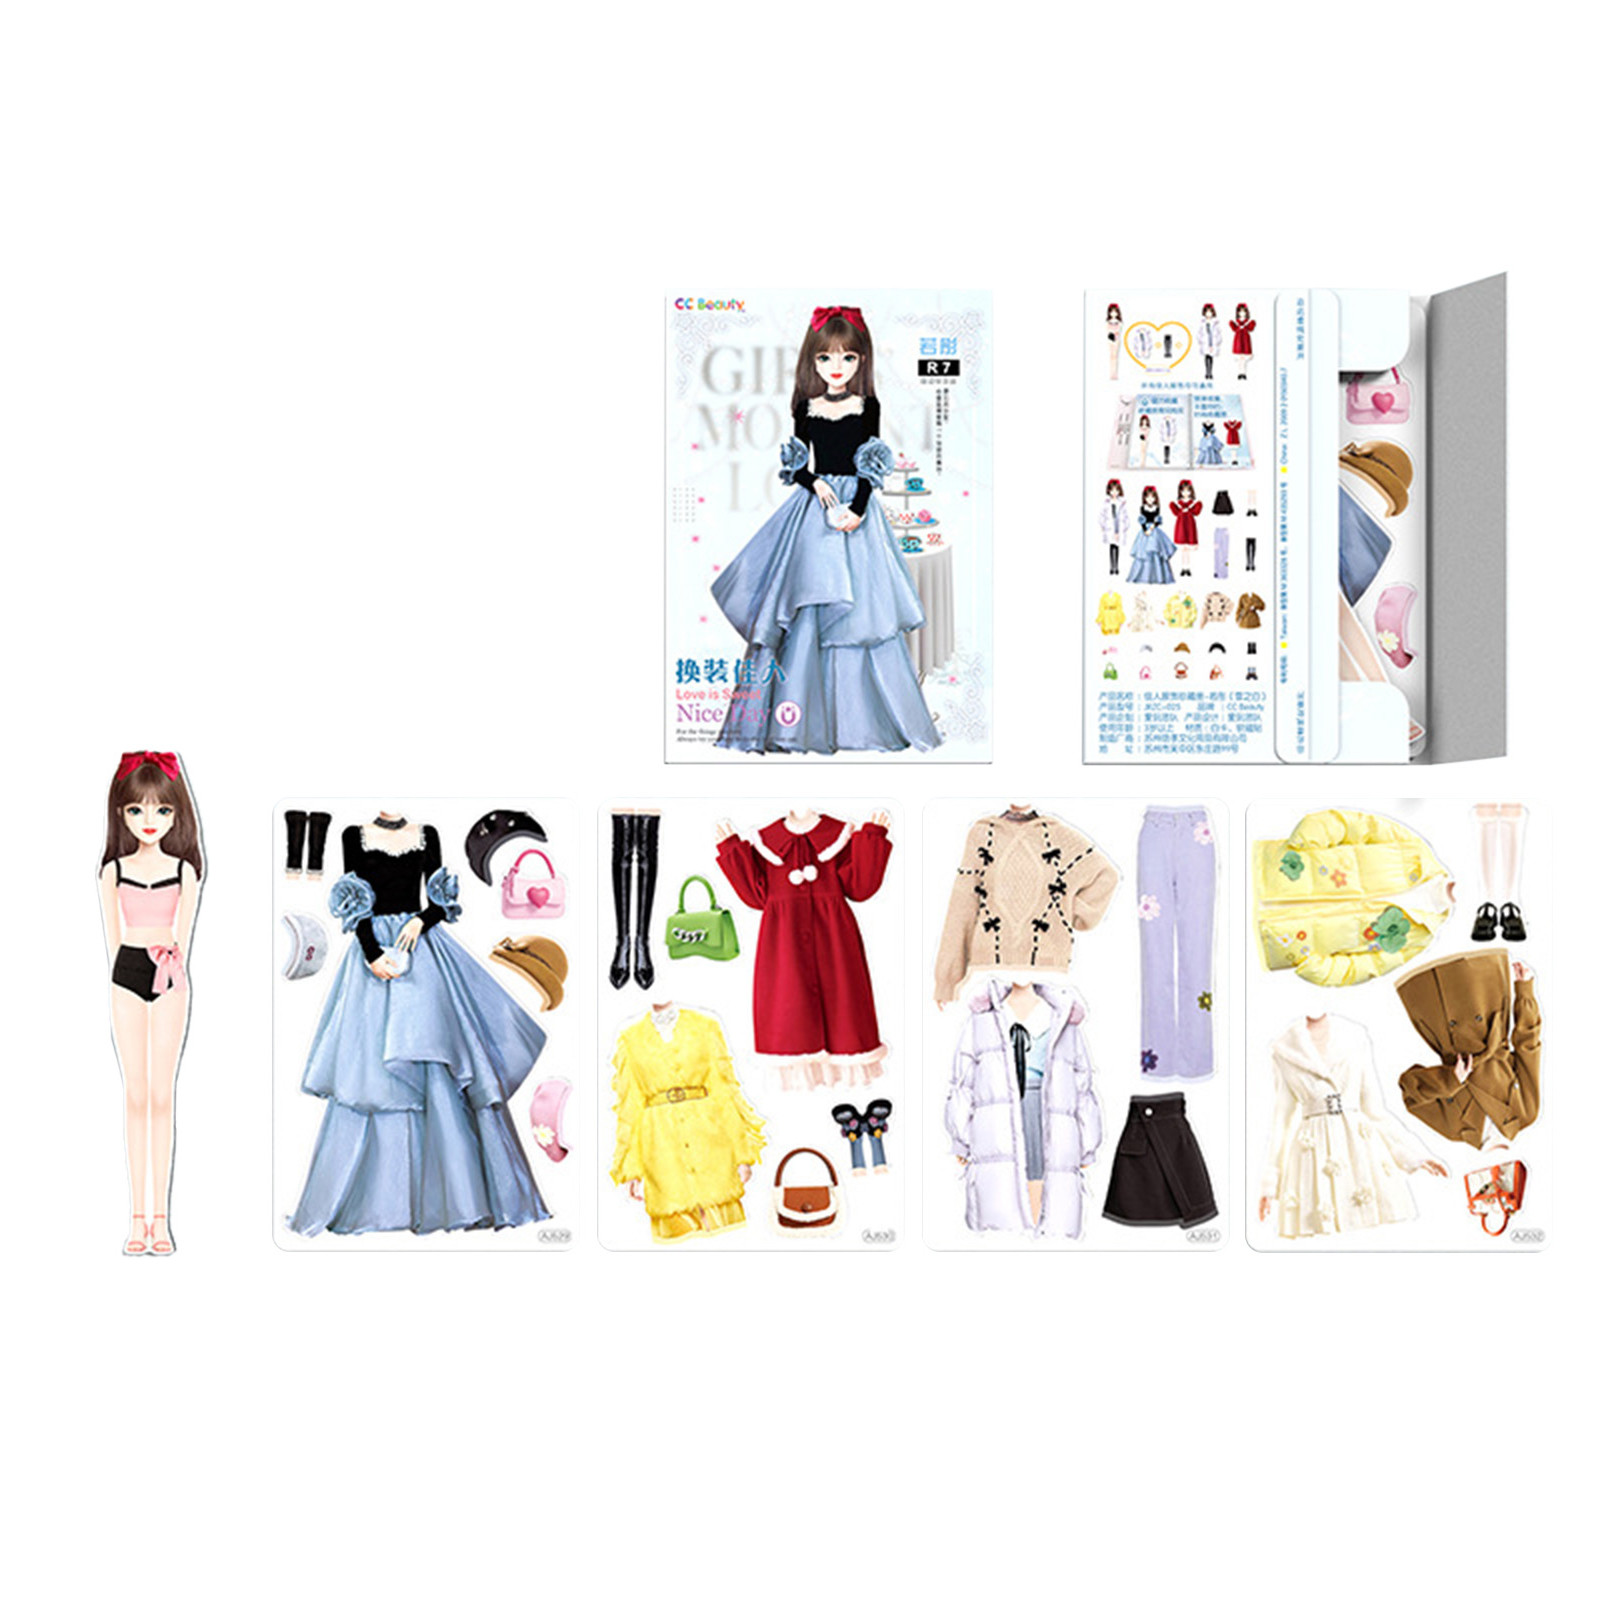 Loyerfyivos Magnetic Princess Dress Up Paper Doll Pretend Play Game, Travel Toys Car Road Trip,Magnet Clothes Puzzles for Kids Toddler Girls,Preschool Learning Created Imagine Set Birthday Gift - image 4 of 6